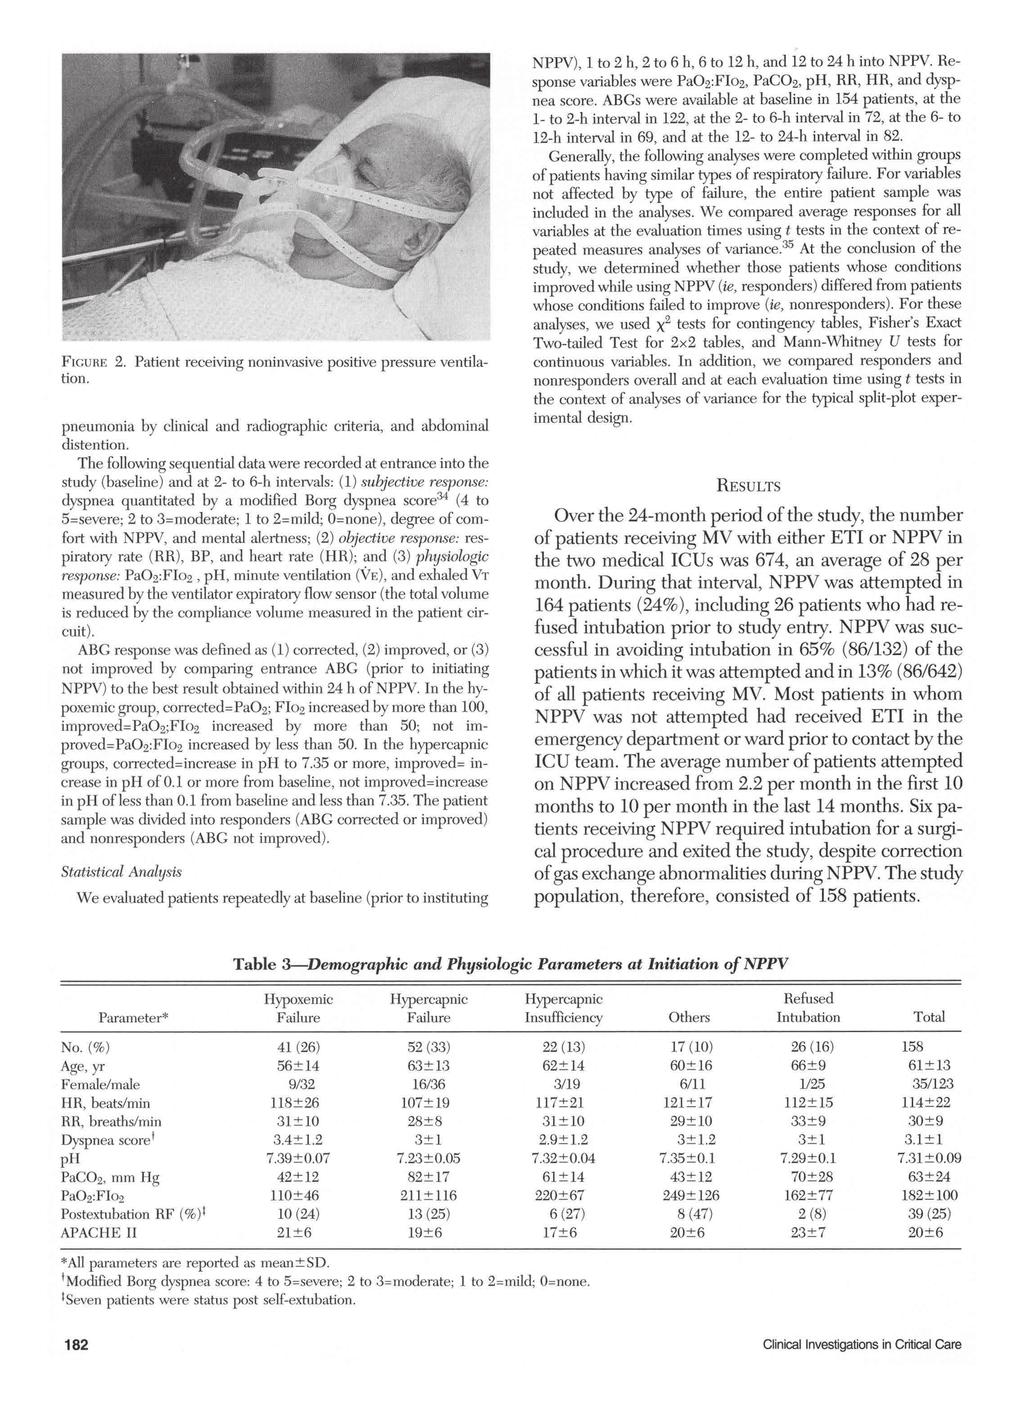 FGURE 2. Patient receiving noninvasive positive pressure ventilation. pneumonia by clinical and radiographic criteria, and abdominal distention.